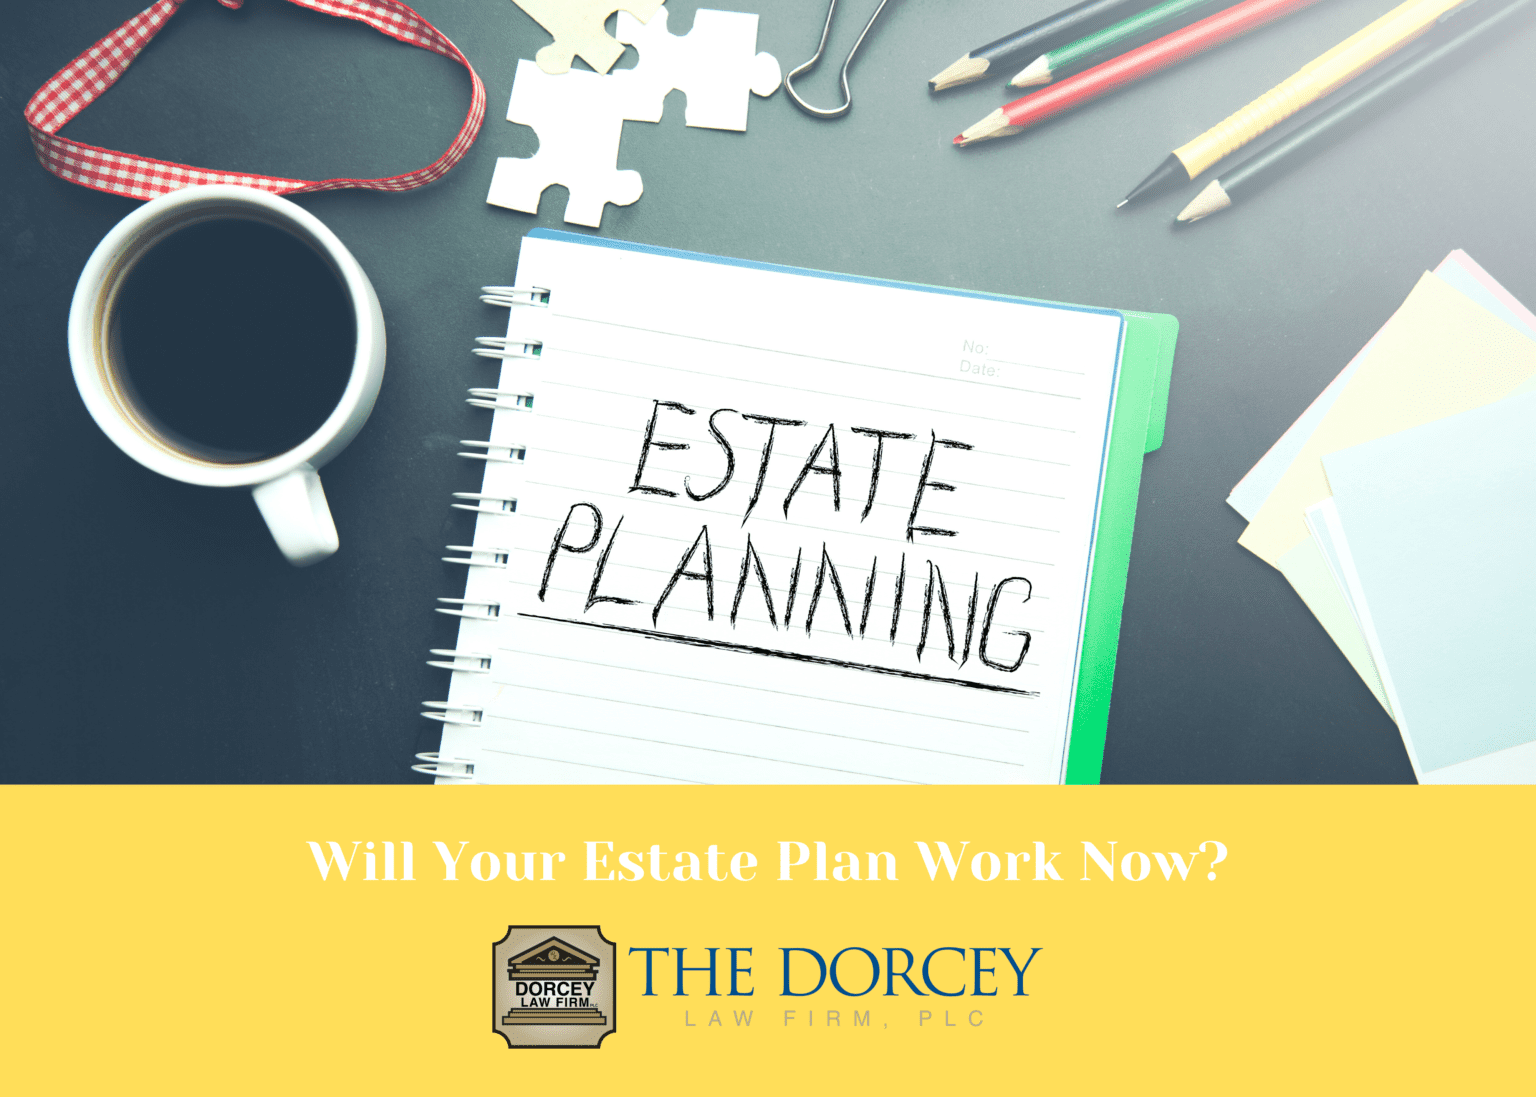 Will Your Estate Plan Work Now? text